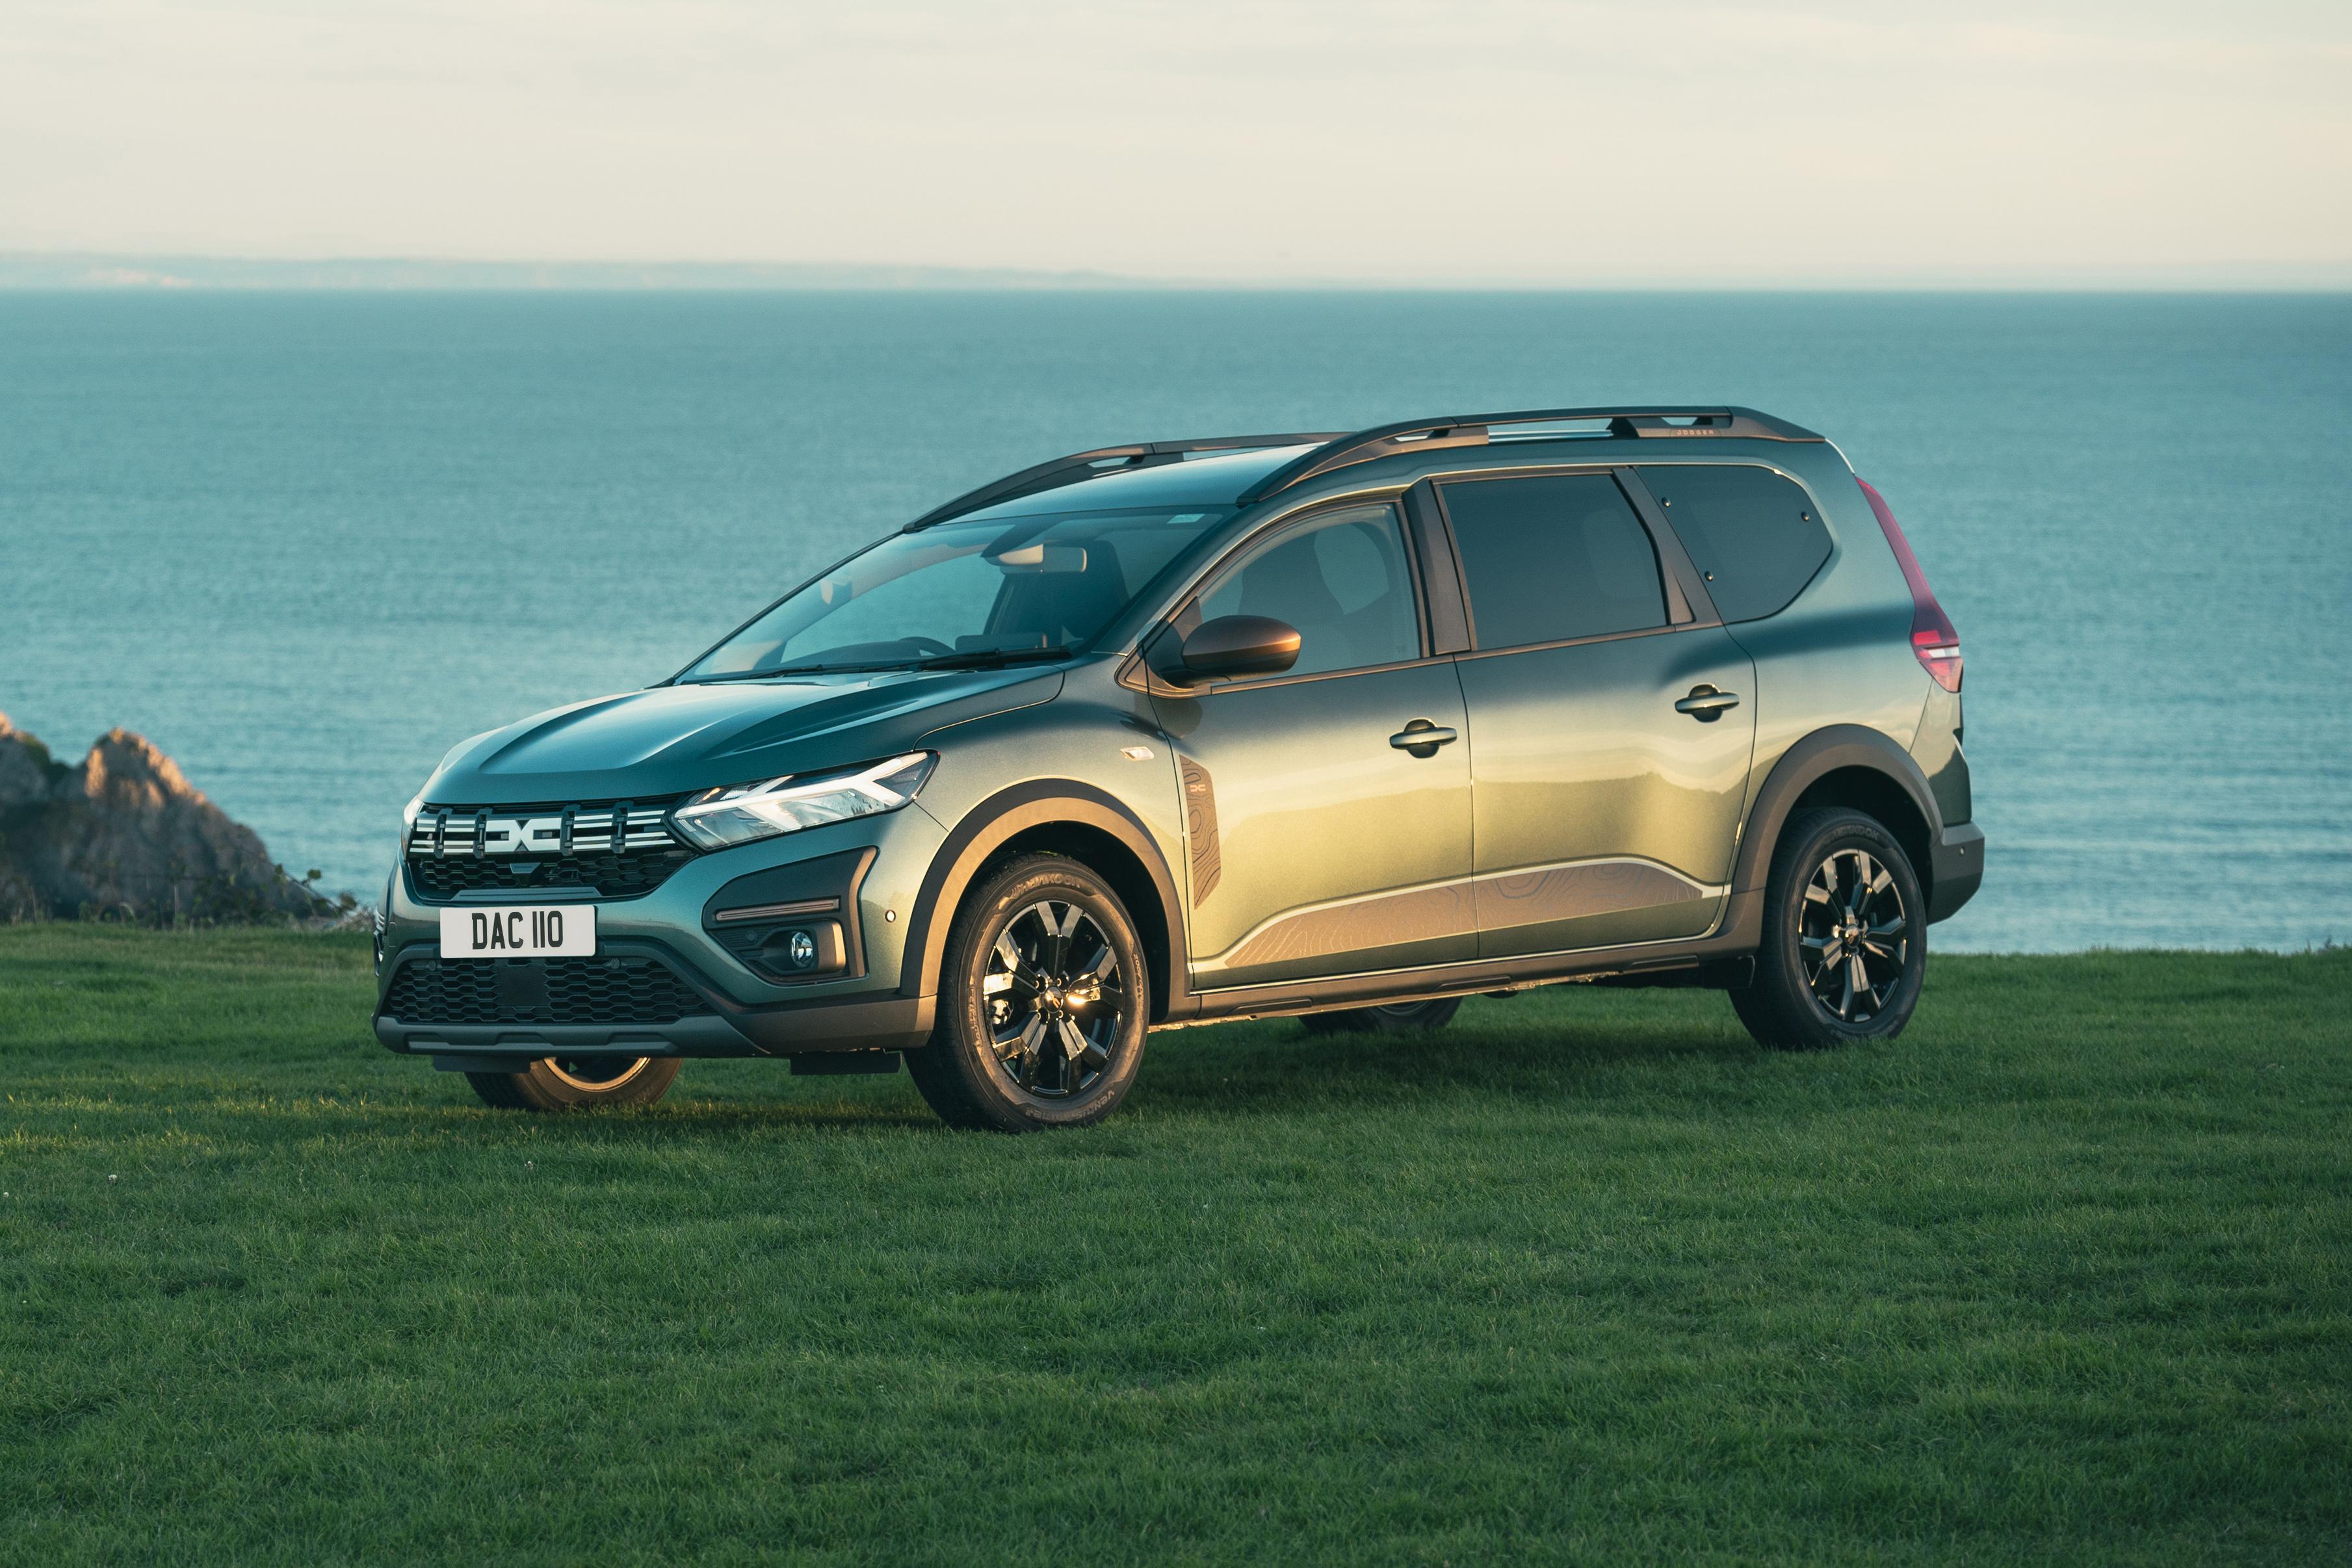 Dacia CEO: Why we are more than just a 'low-cost' brand